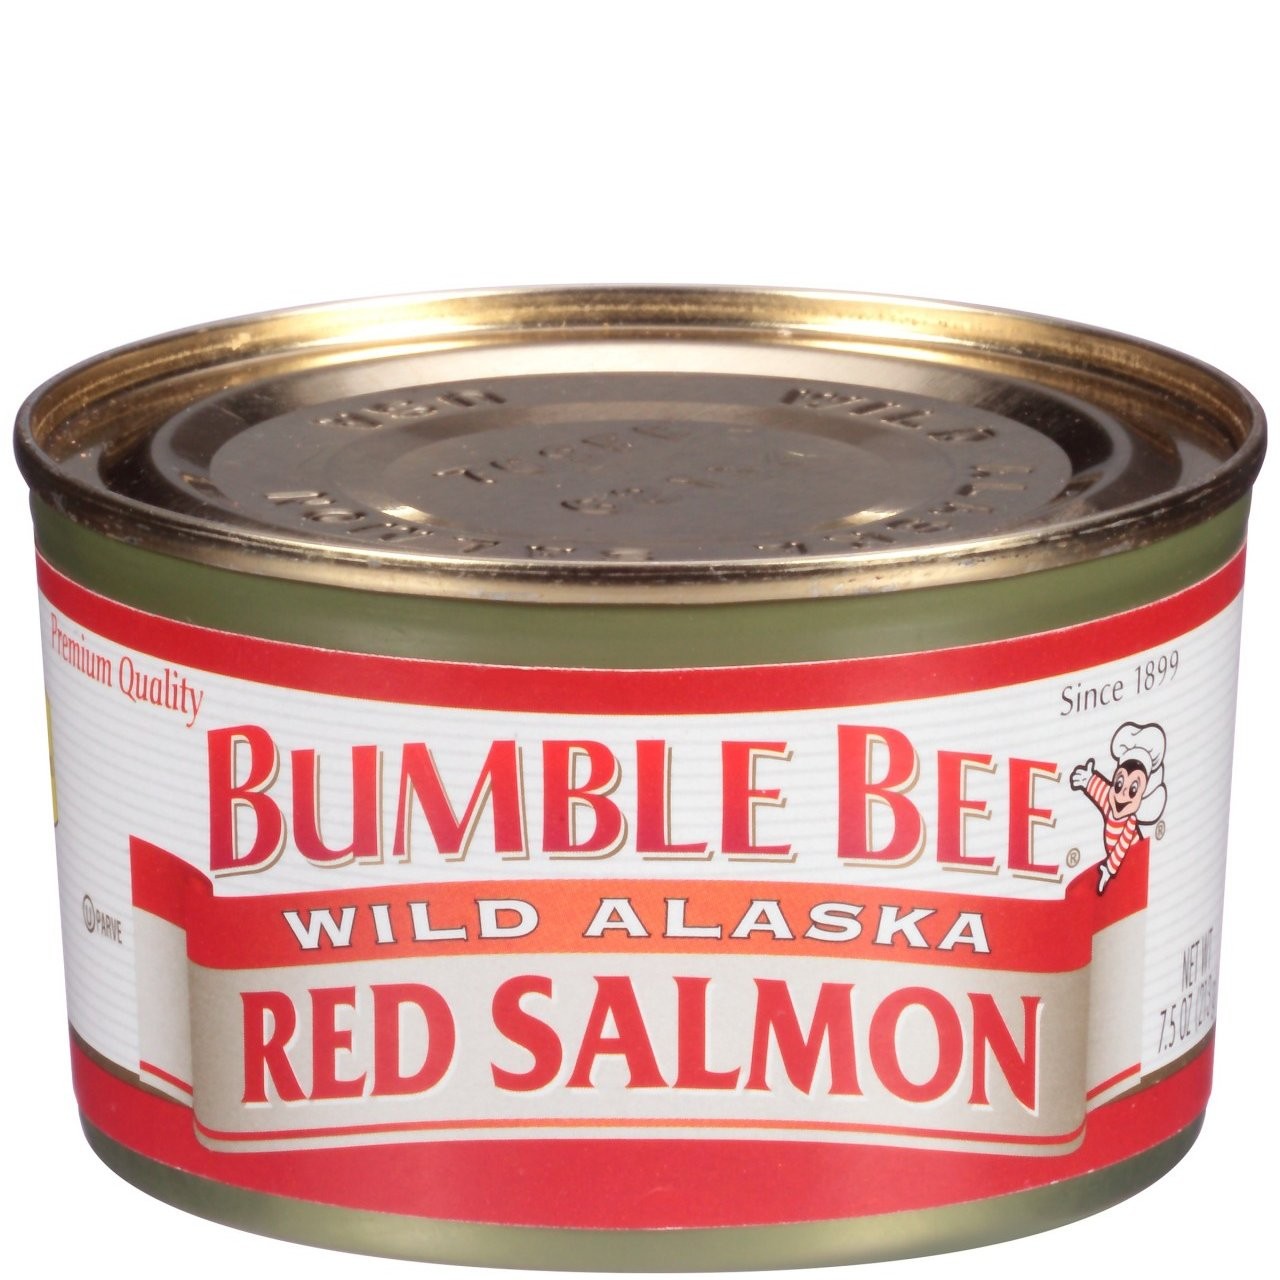 BUMBLE BEE RED SALMON 213g